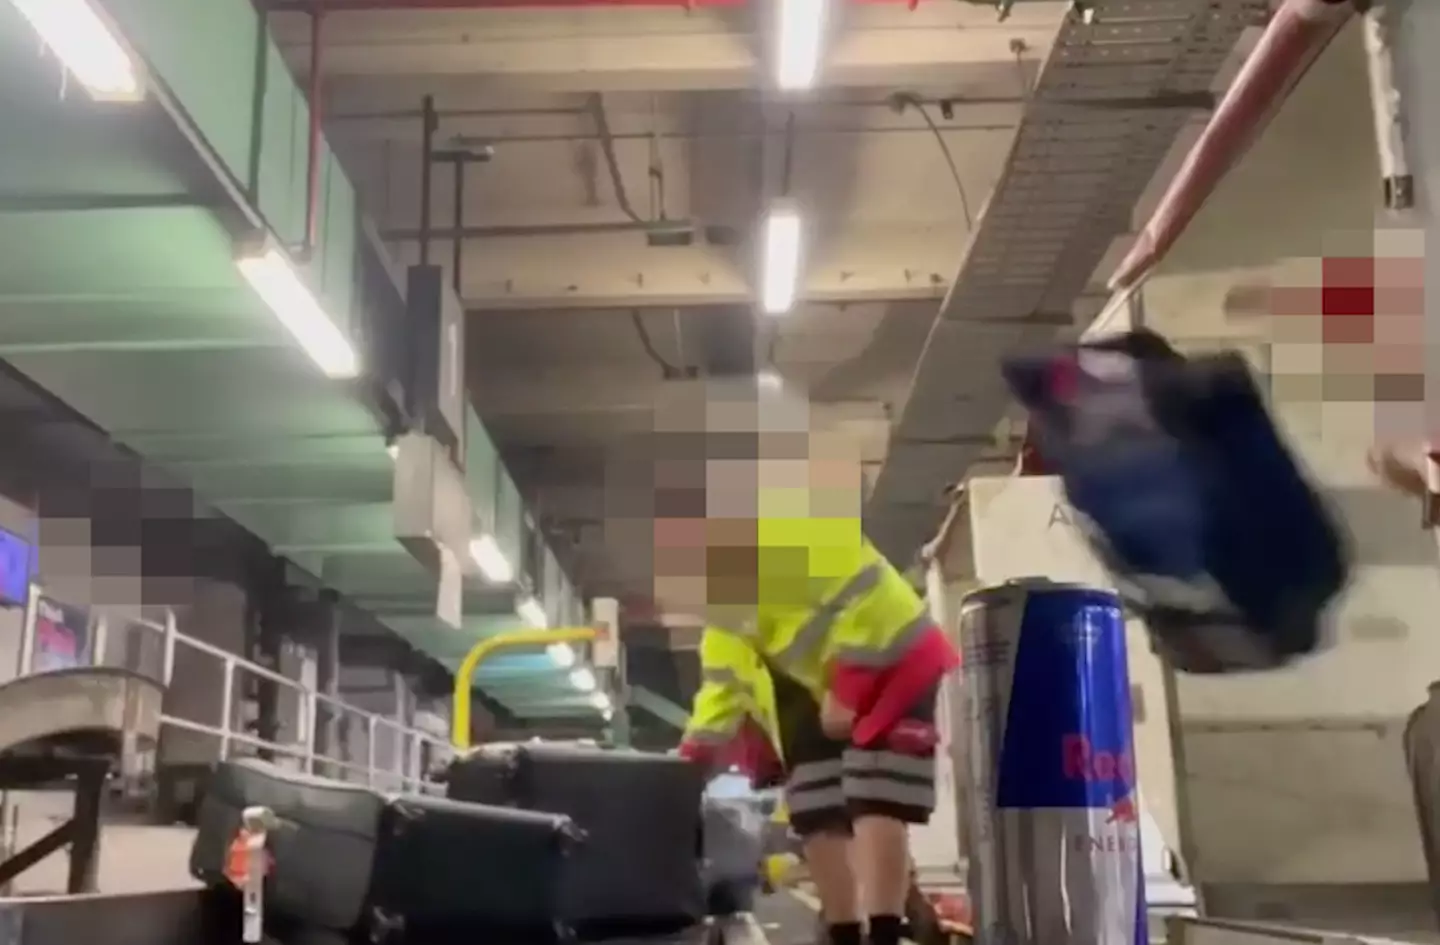 The baggage handlers' behaviour has been branded 'a disgrace'.